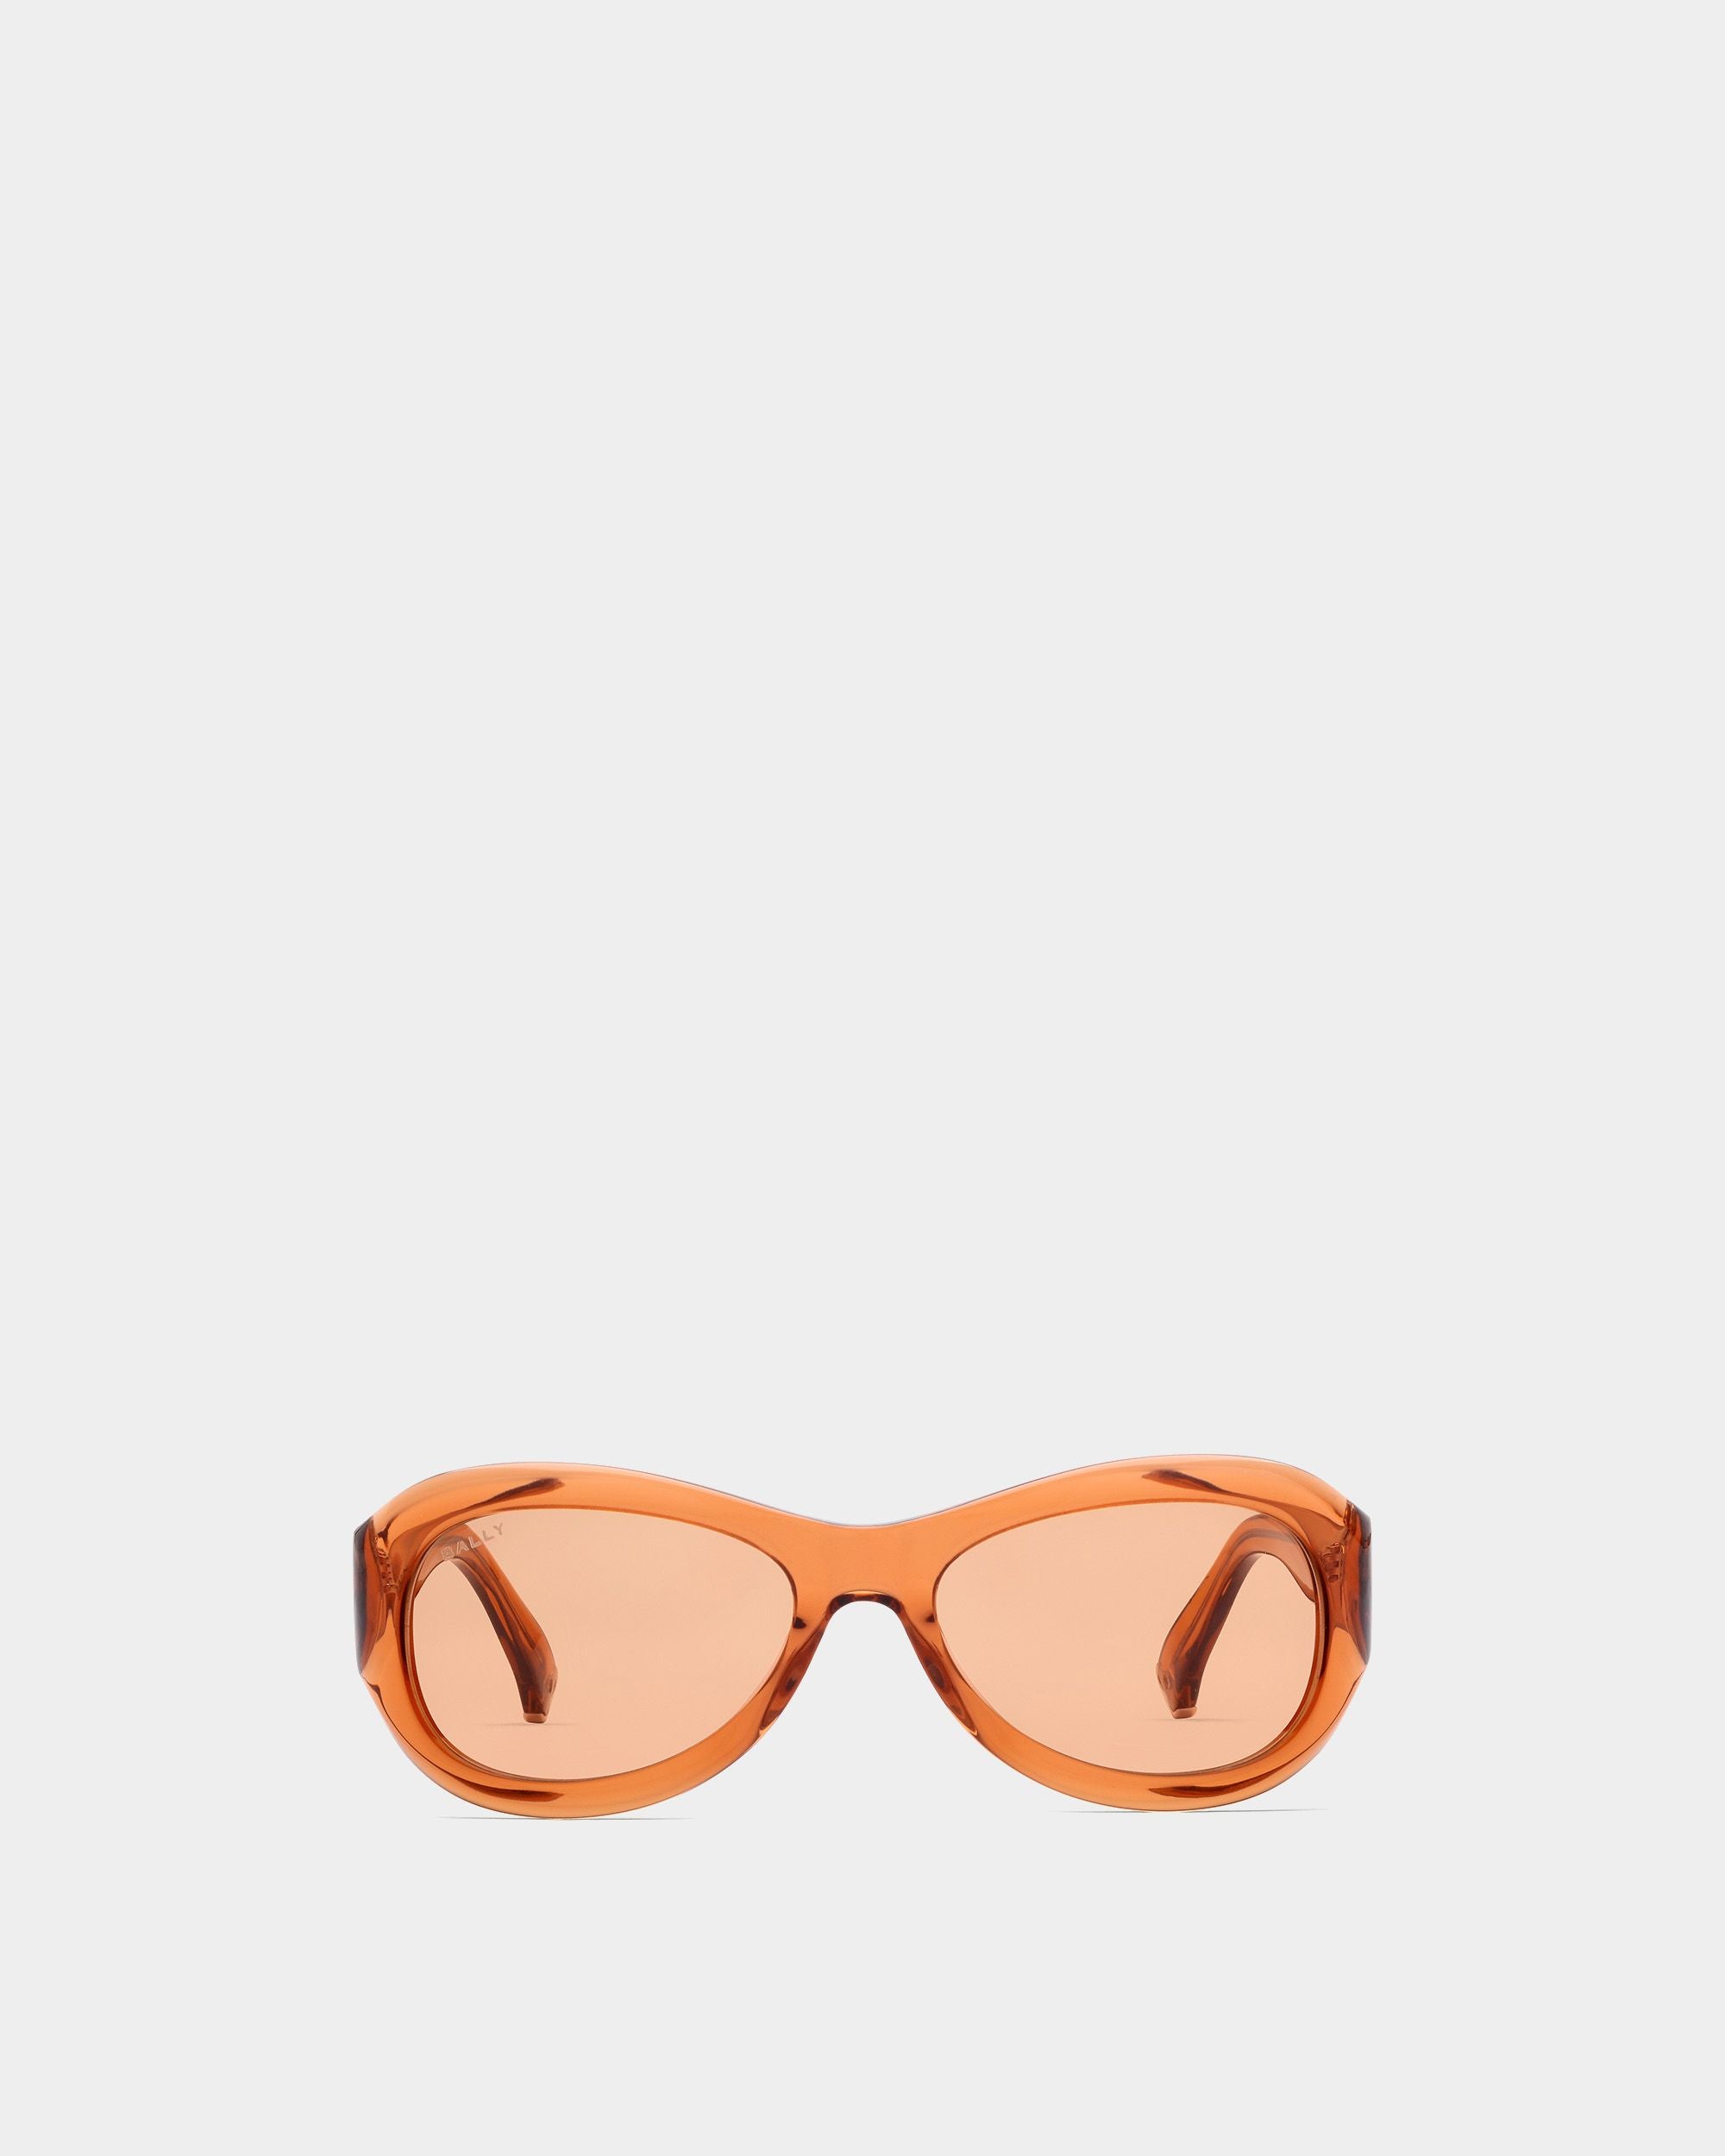 Maurice Acetate Sunglasses in Amber and Orange | Bally | Still Life Front